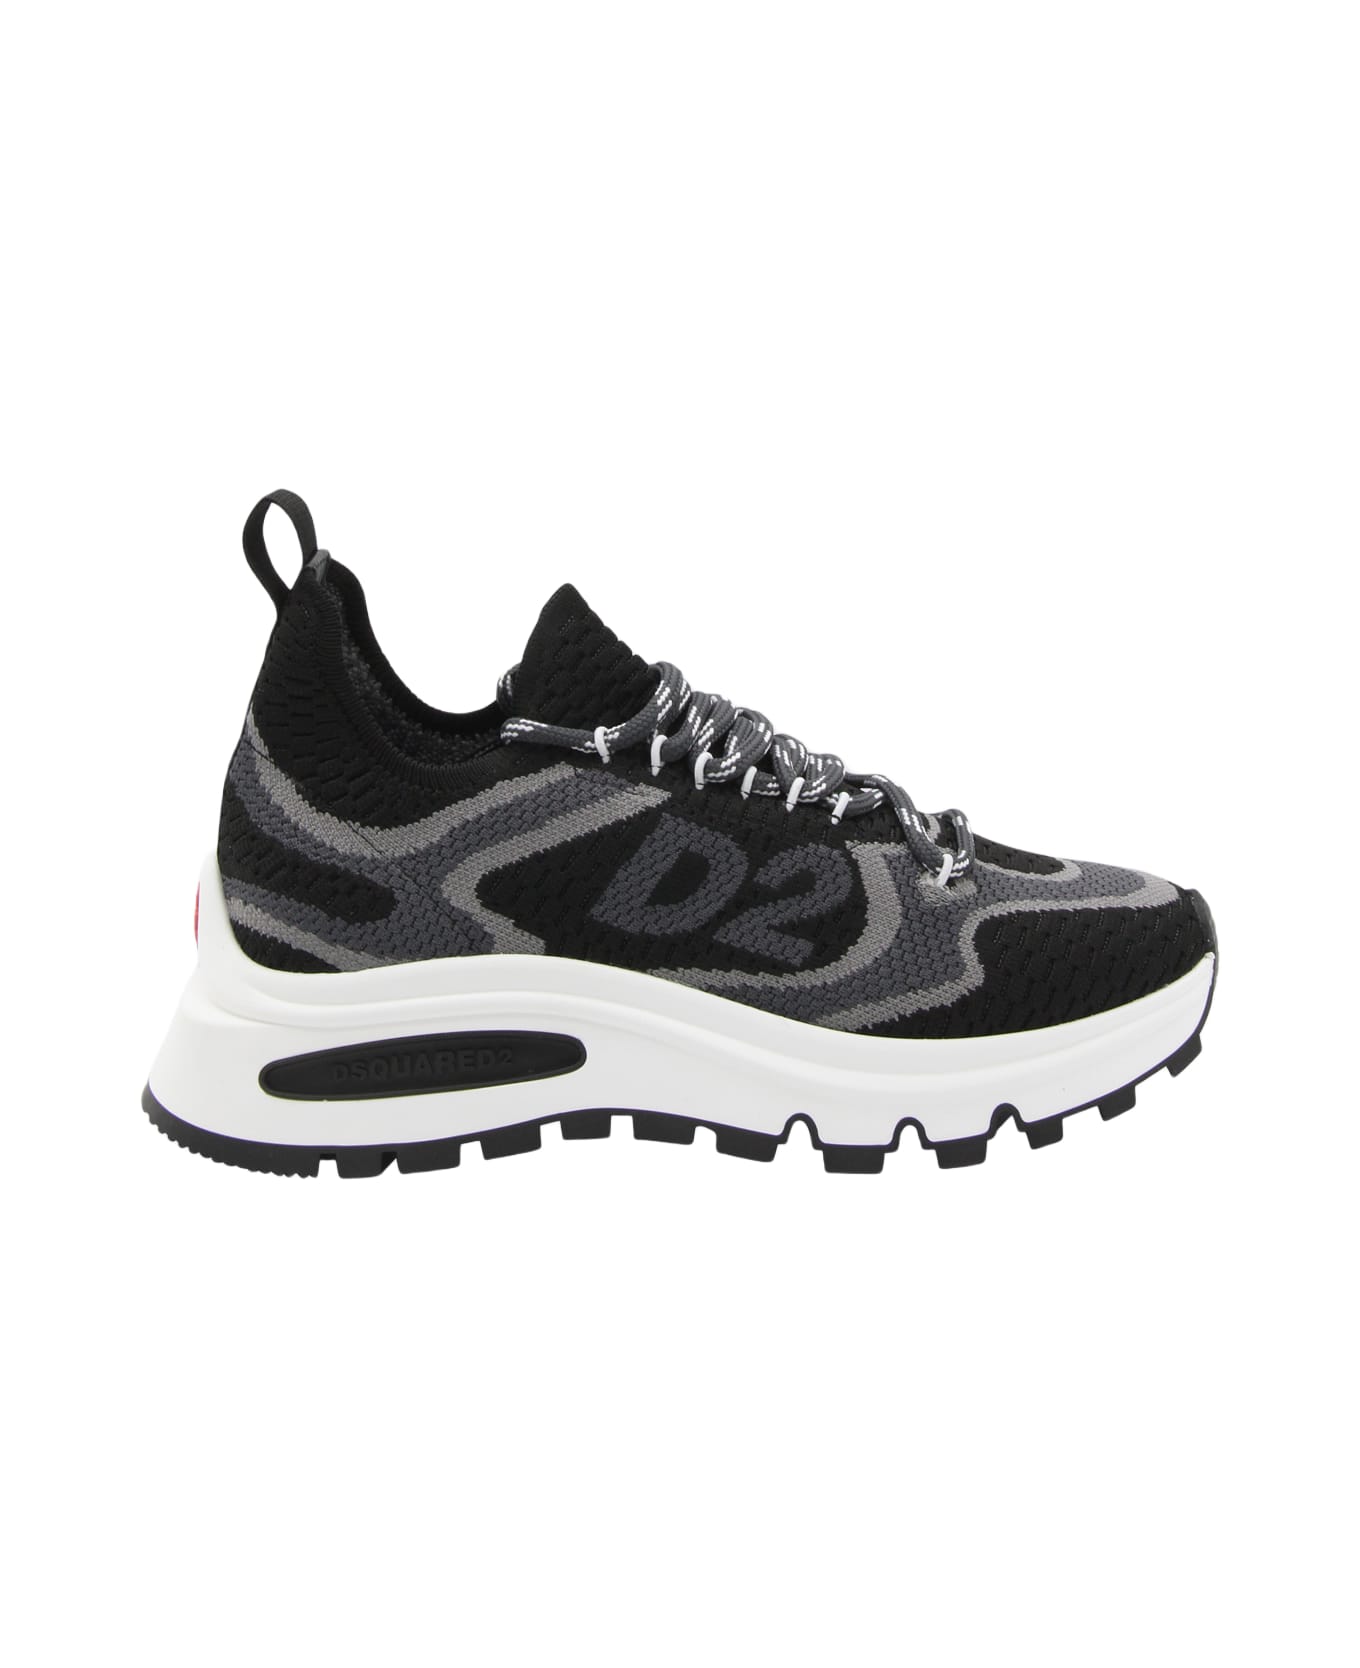 Dsquared2 Black Leather Sneakers - Black/grey